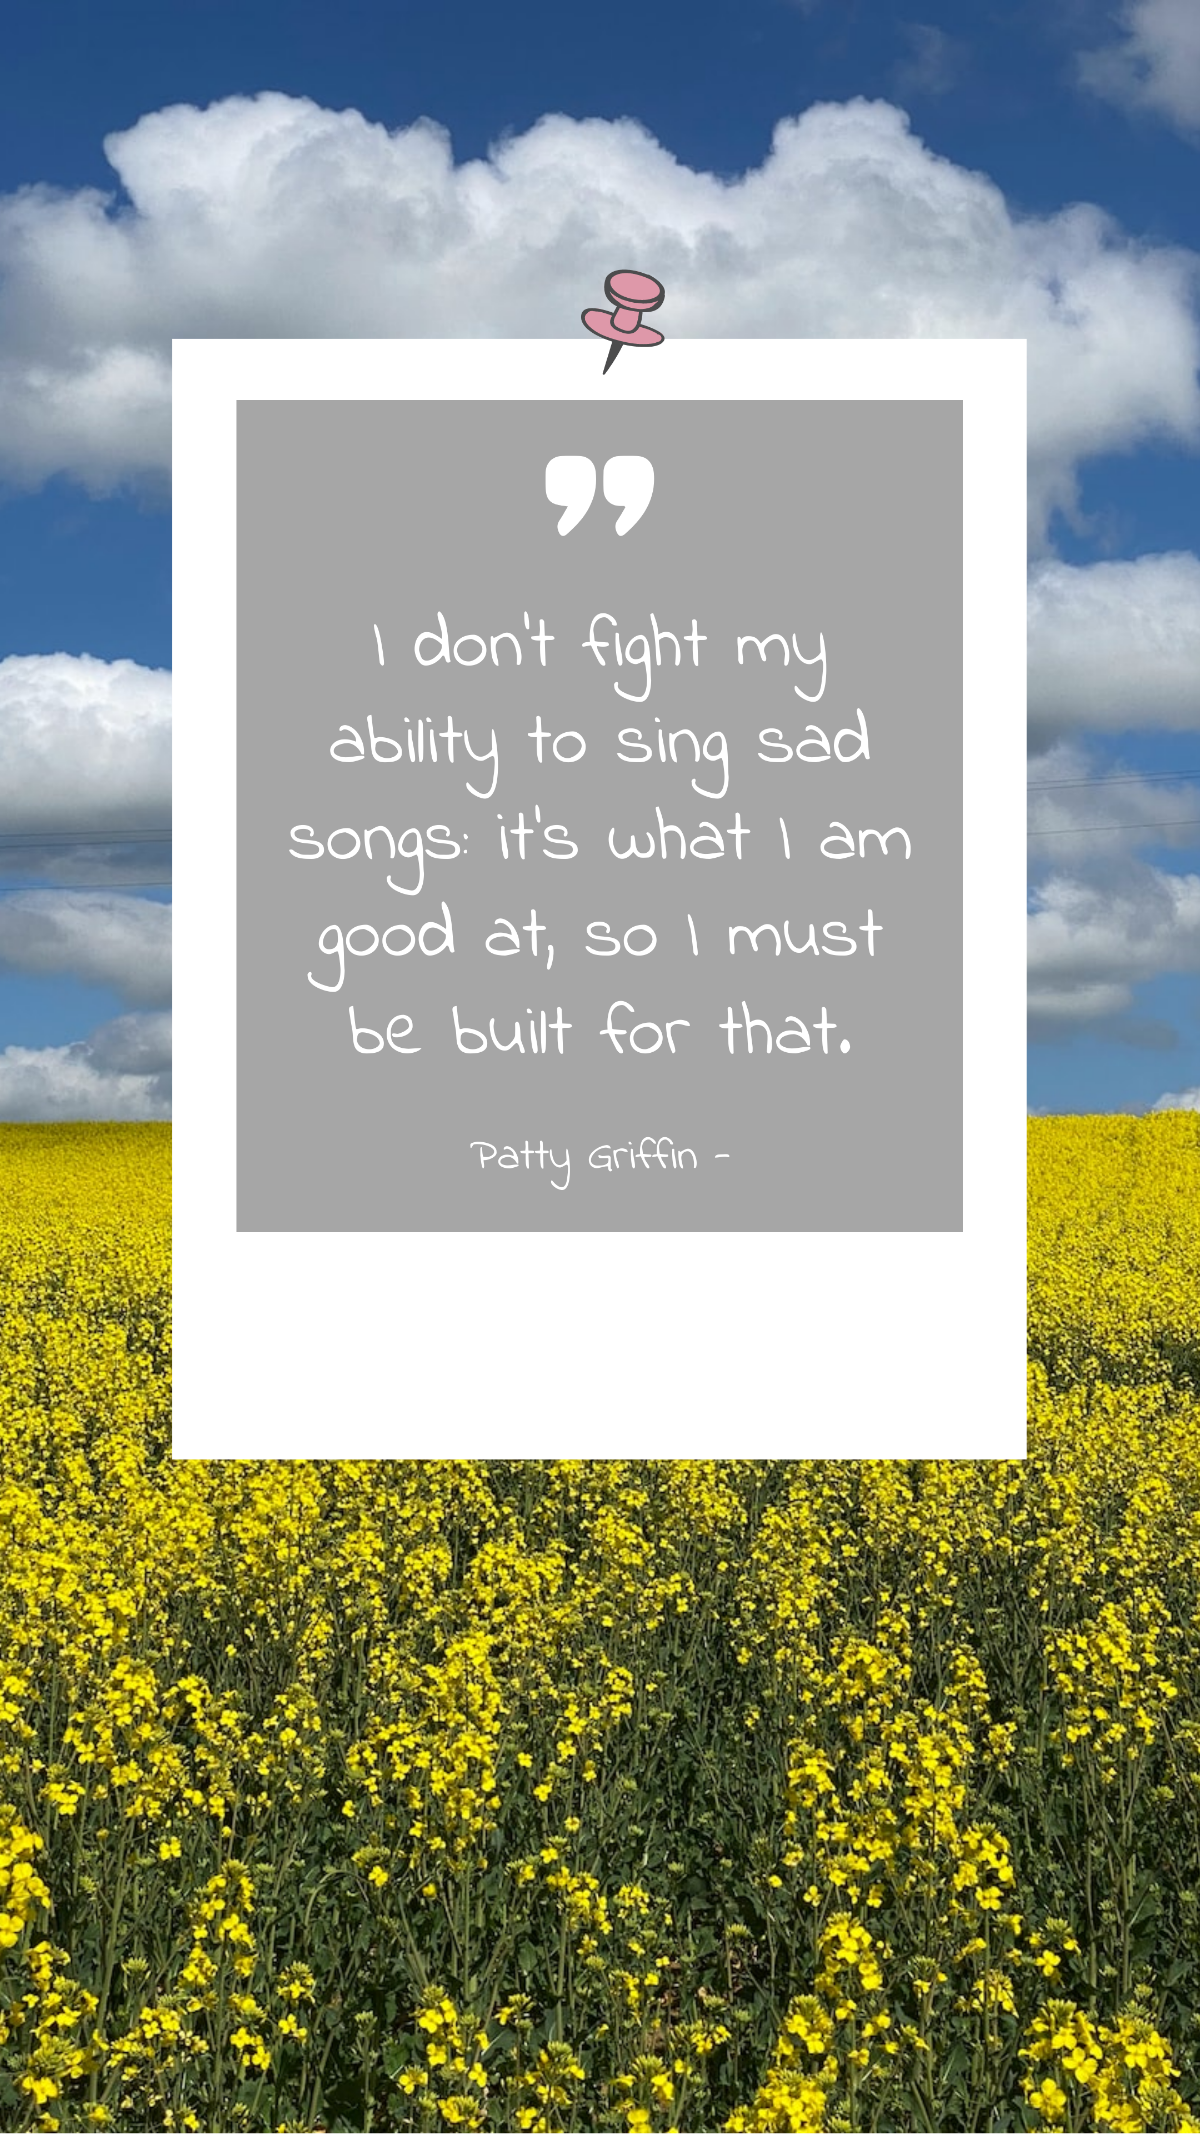 Patty Griffin - I don't fight my ability to sing sad songs: it's what I am good at, so I must be built for that. Template